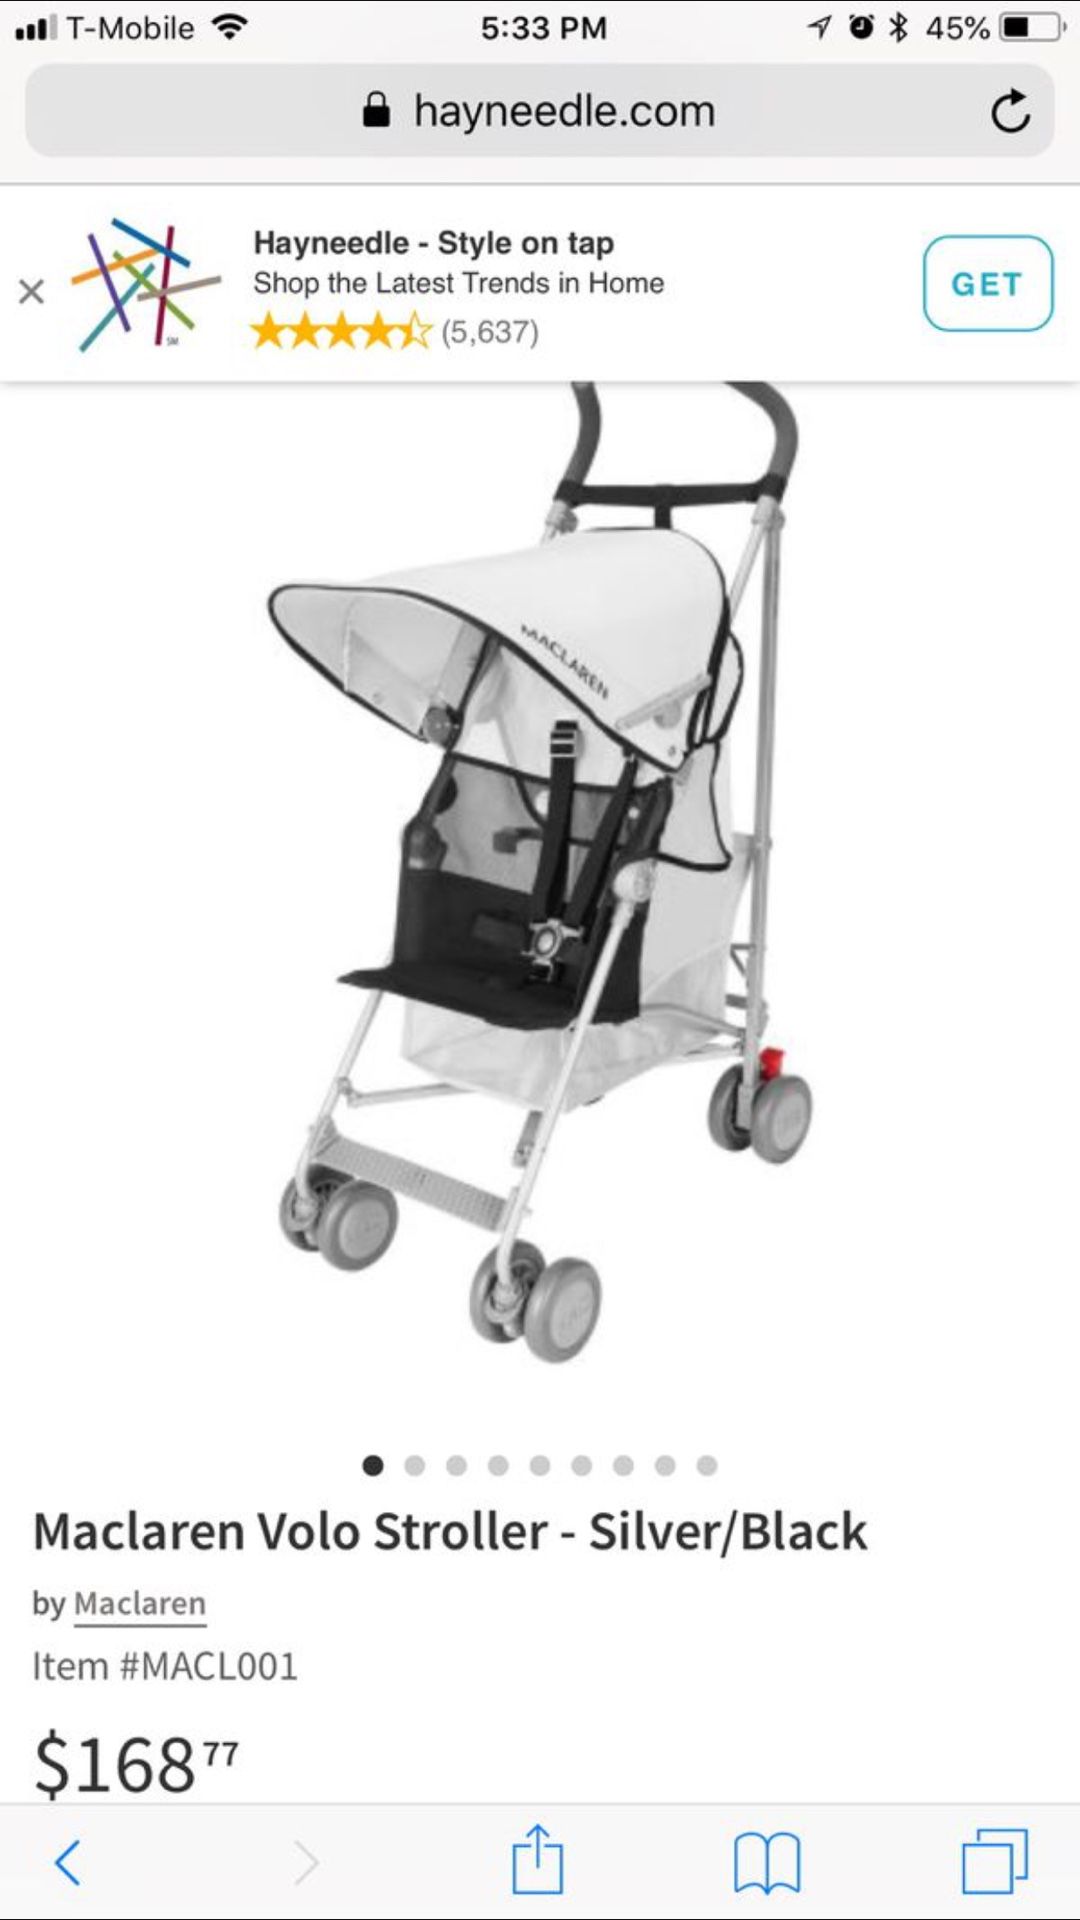 Maclaren stroller imported from England 🏴󠁧󠁢󠁥󠁮󠁧󠁿